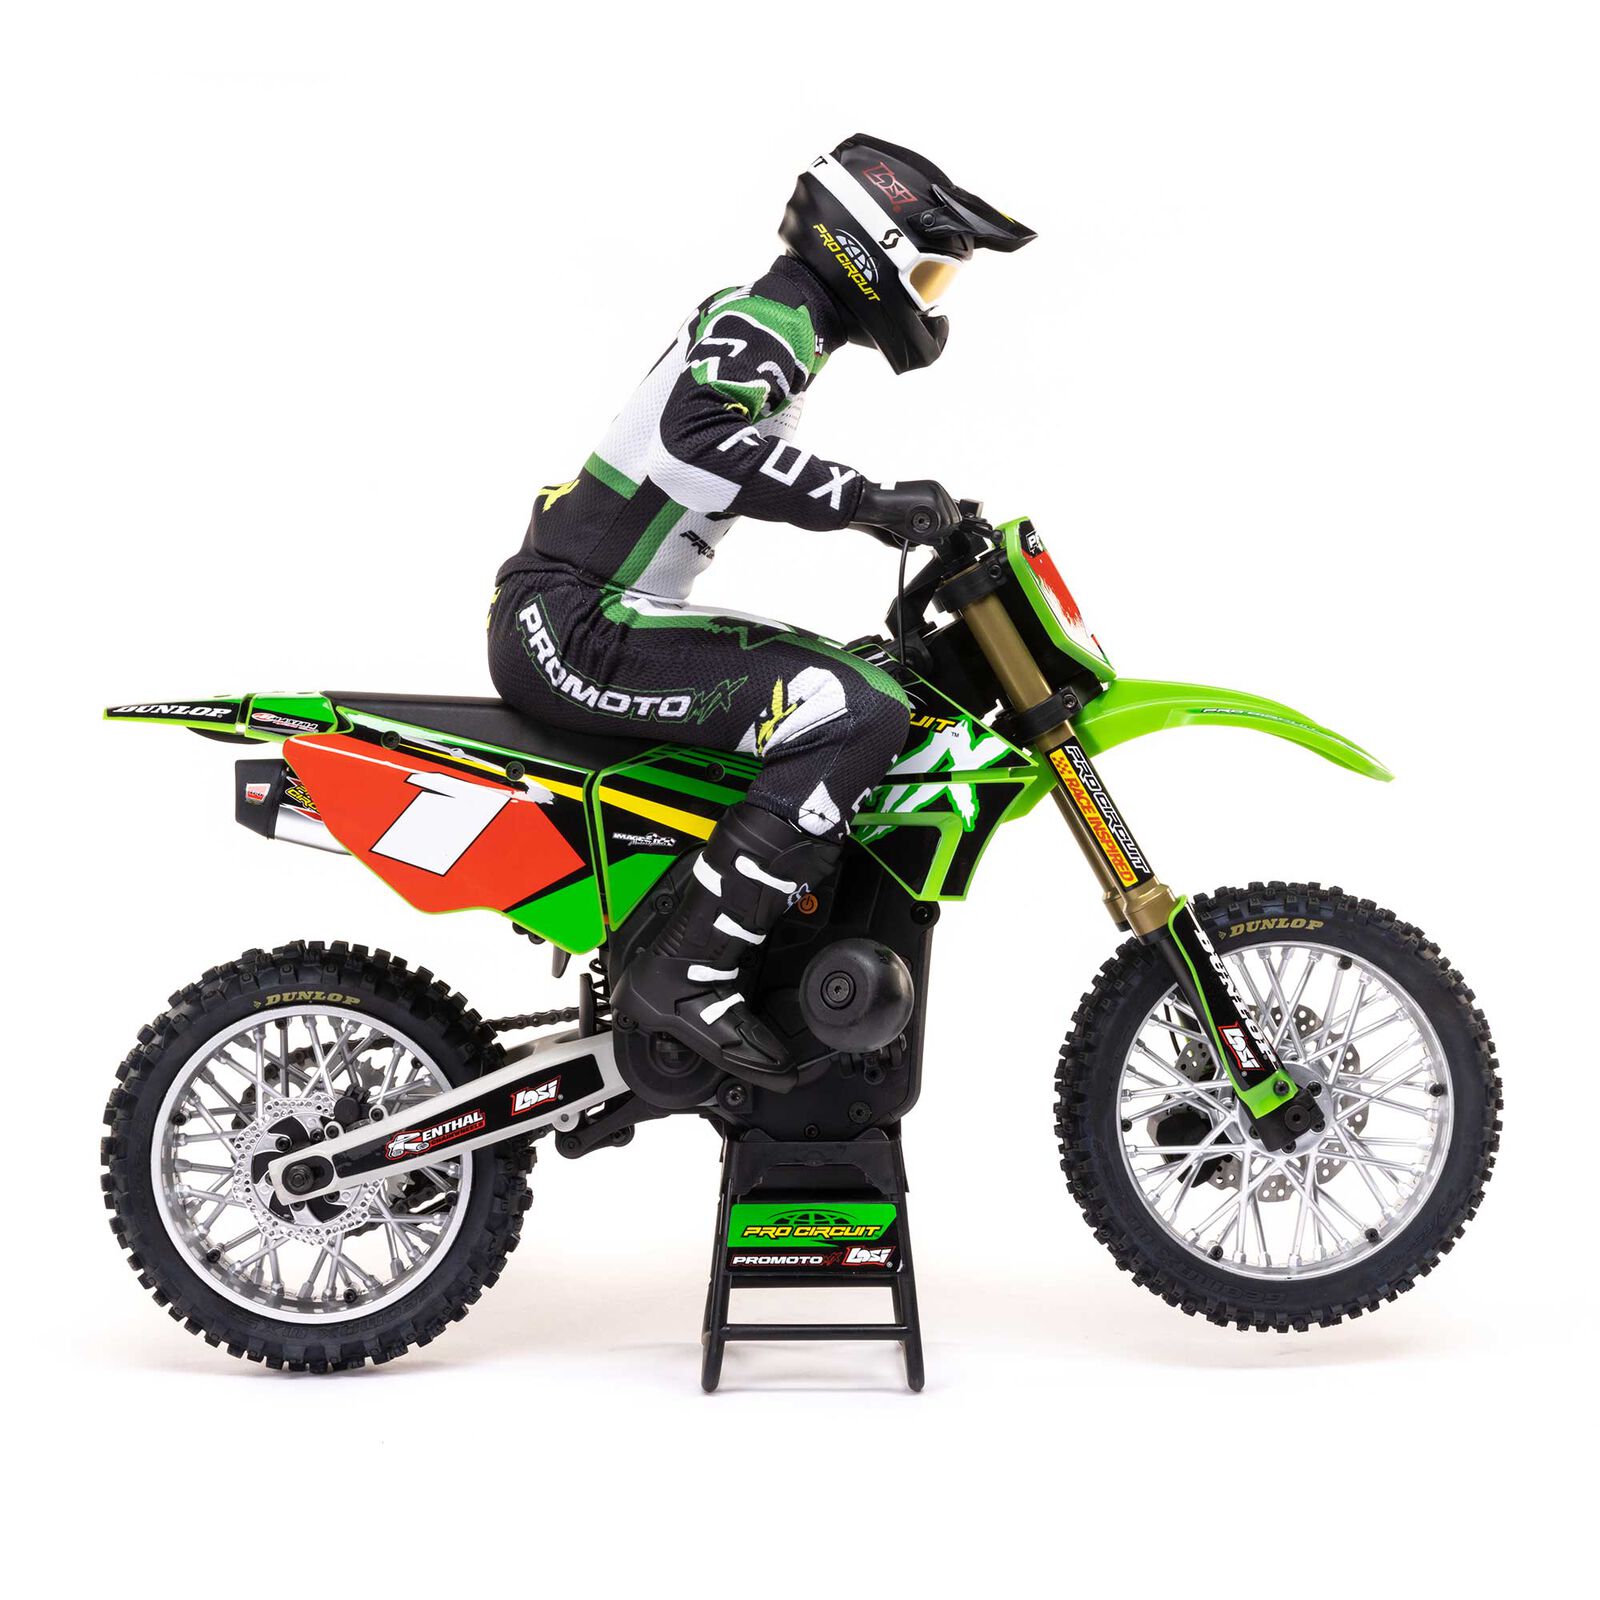 Losi Promoto MX 1/4-Scale Motorcycle RTR